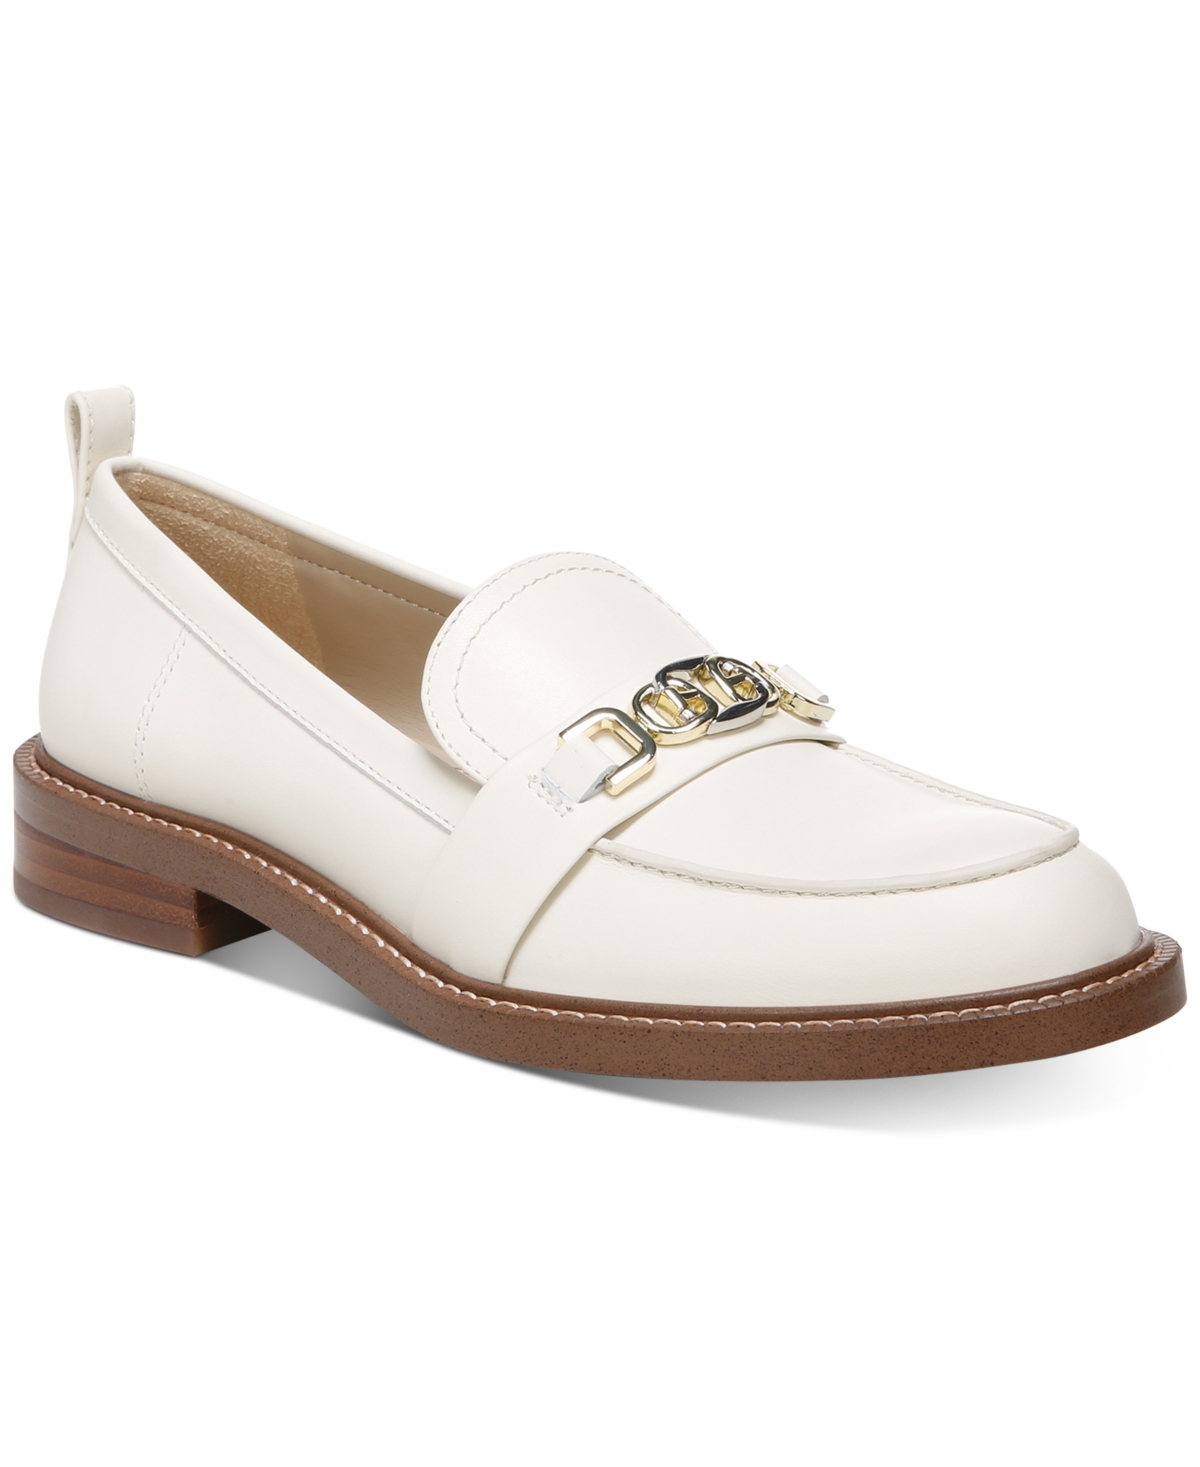 SAM EDELMAN WOMEN'S CHRISTY TAILORED LOAFERS WOMEN'S SHOES